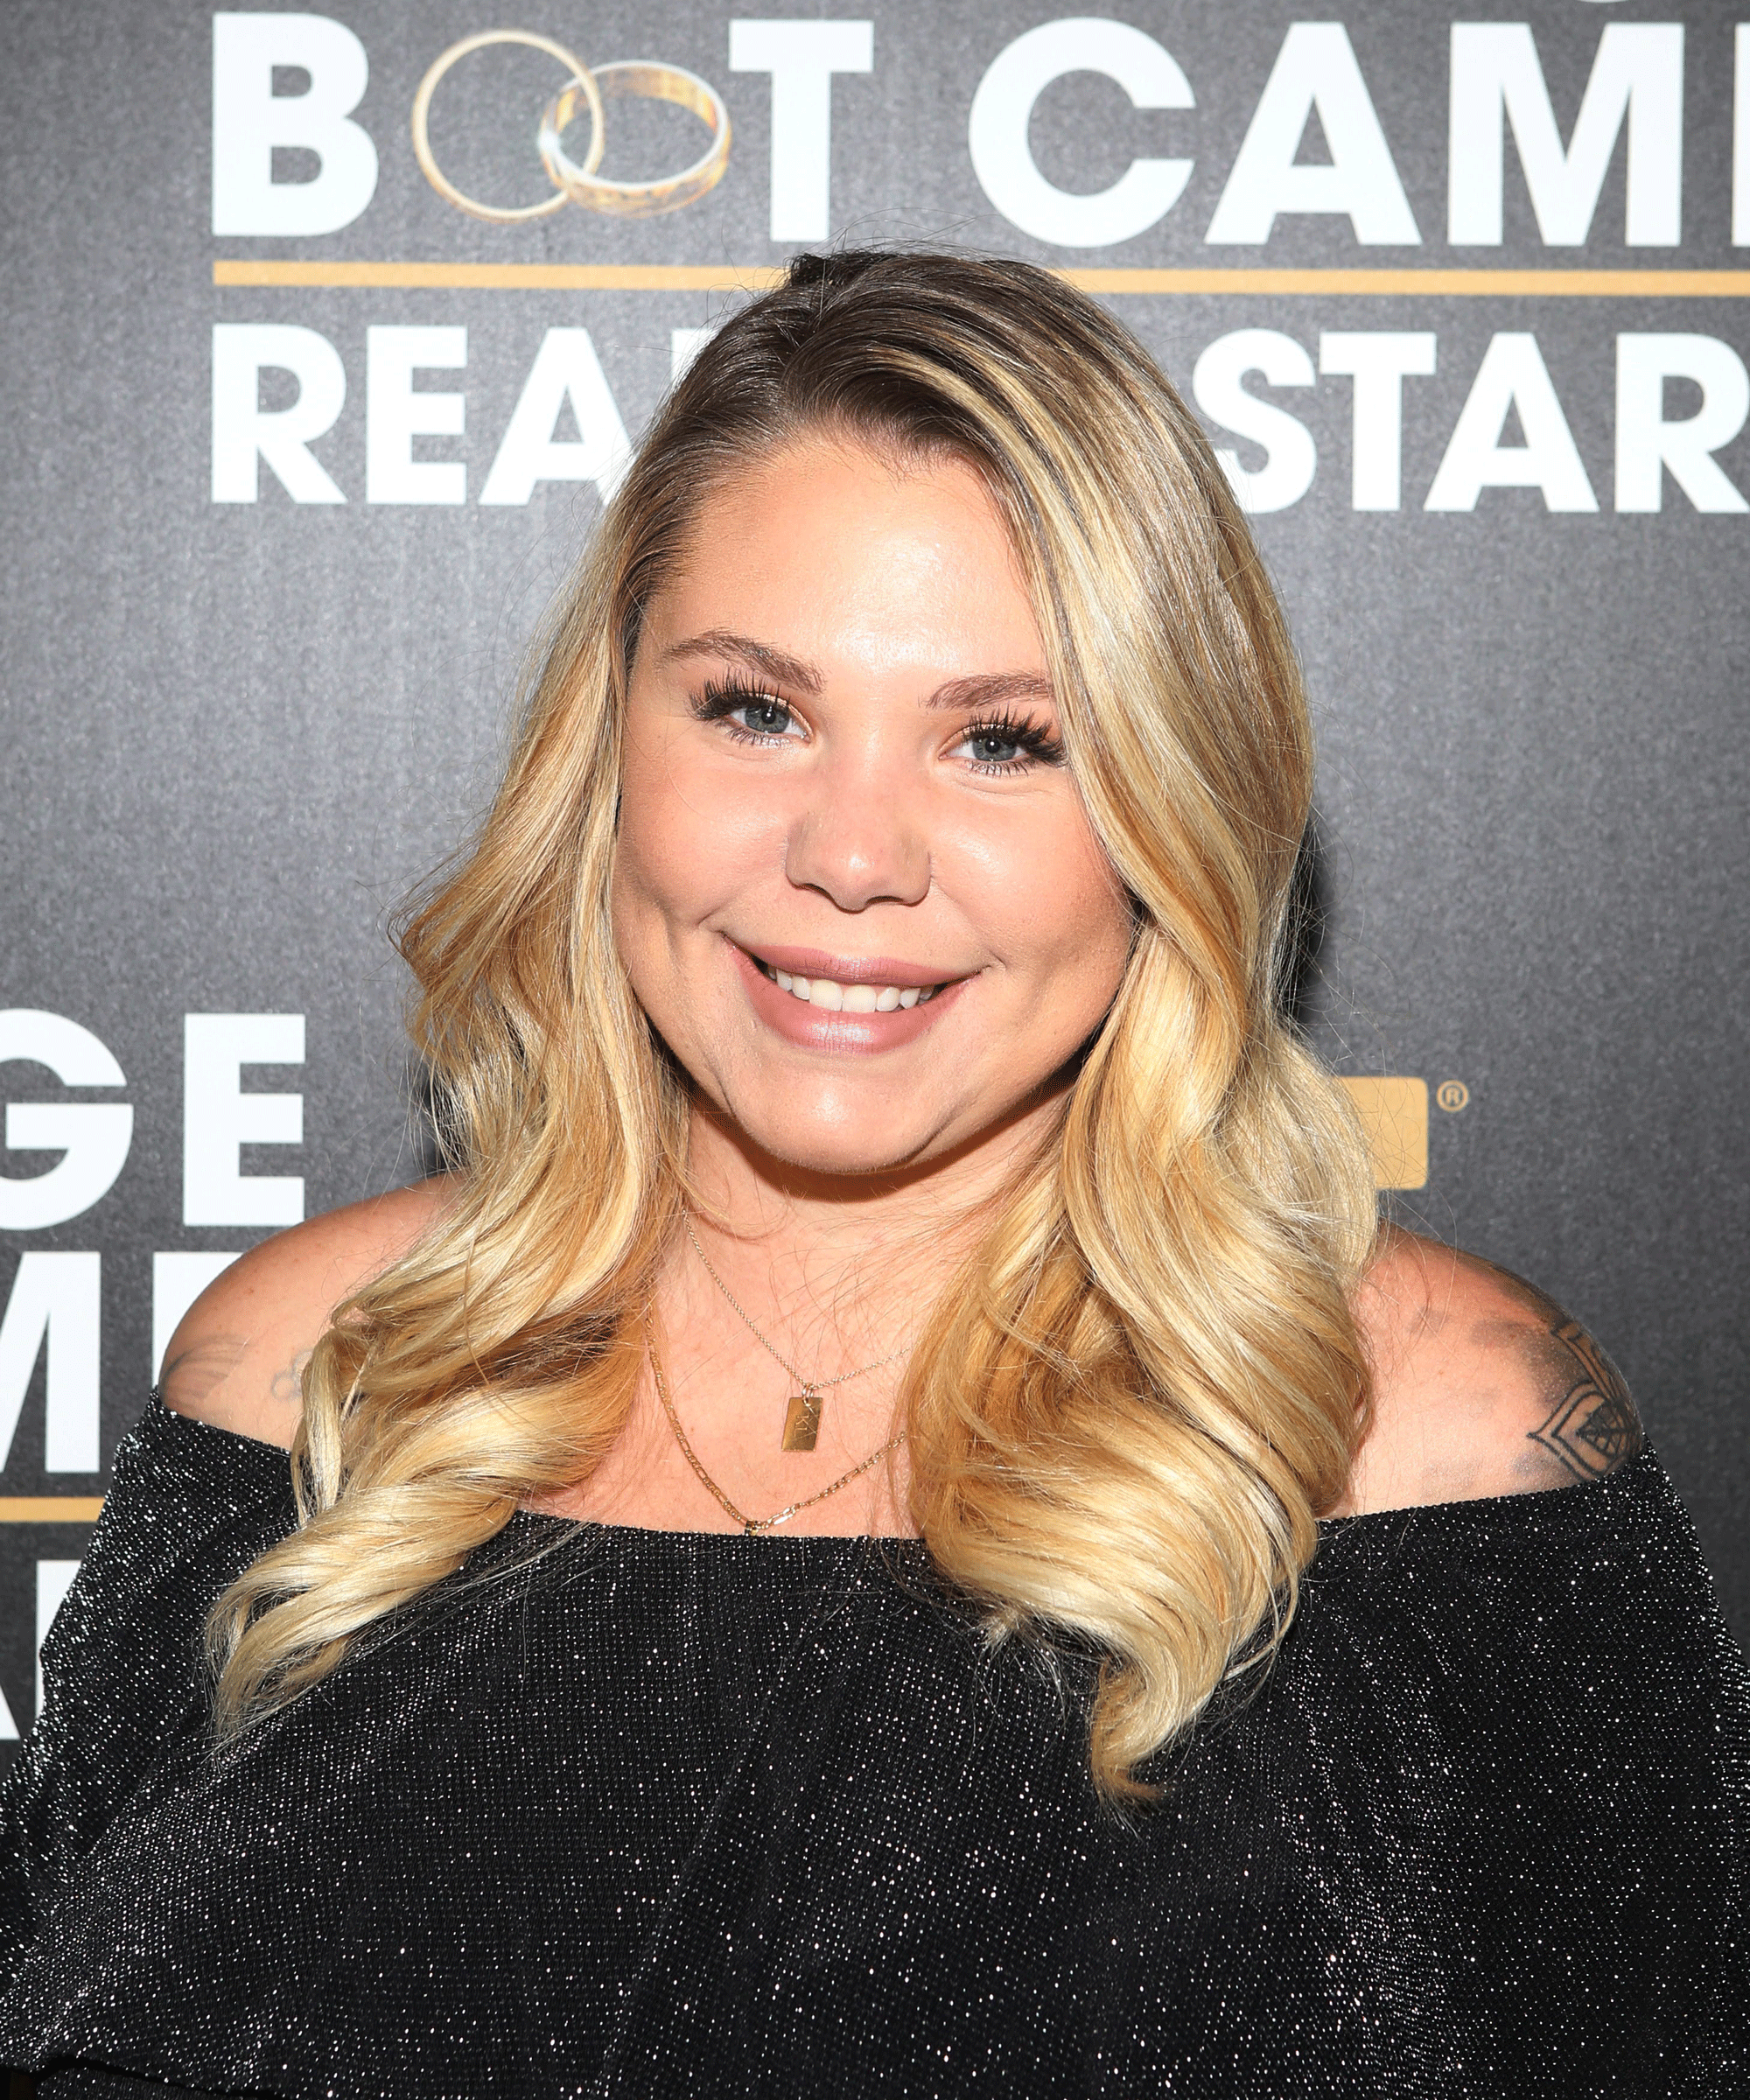 Kailyn Lowry from Teen Mom